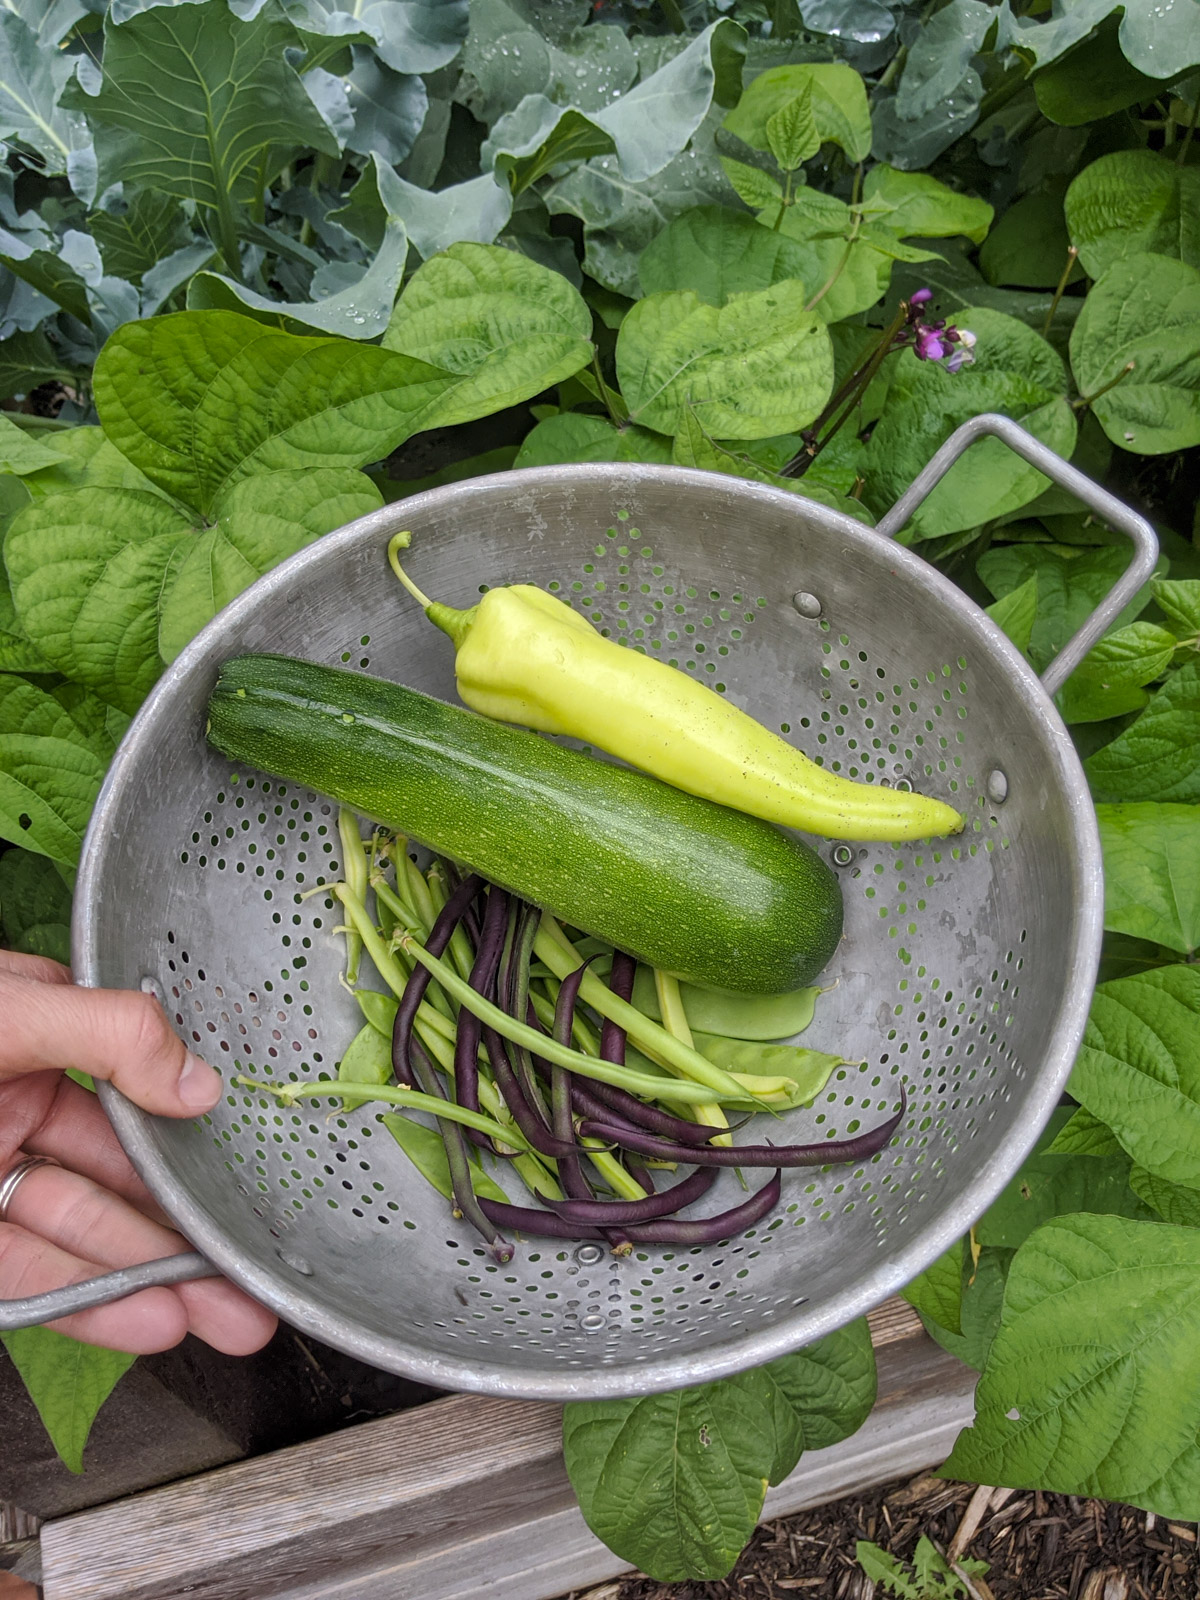 A colander of harvested veggies including zucchini, beans, and peppers.